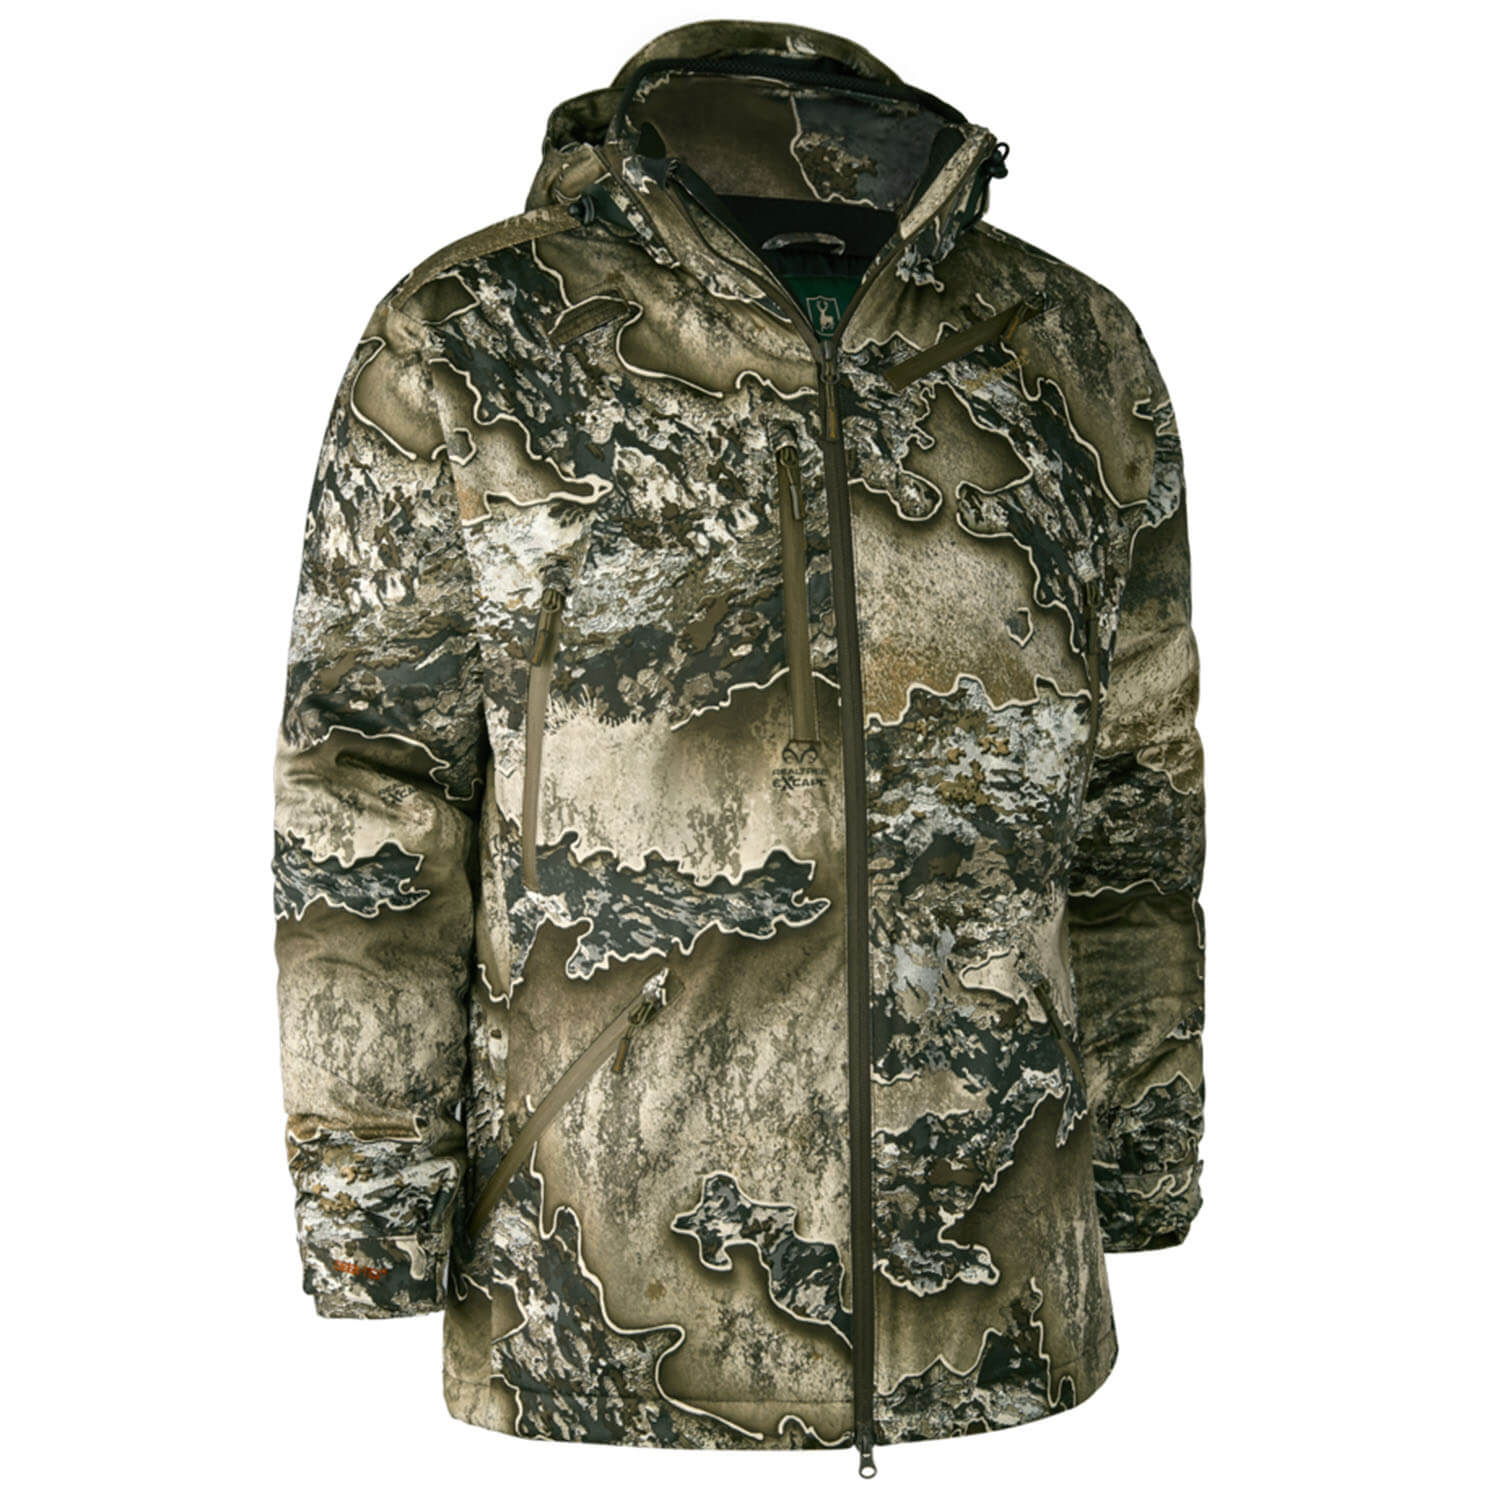 Deerhunter winter jacket Excape (realtree excape) - Winter Hunting Clothing